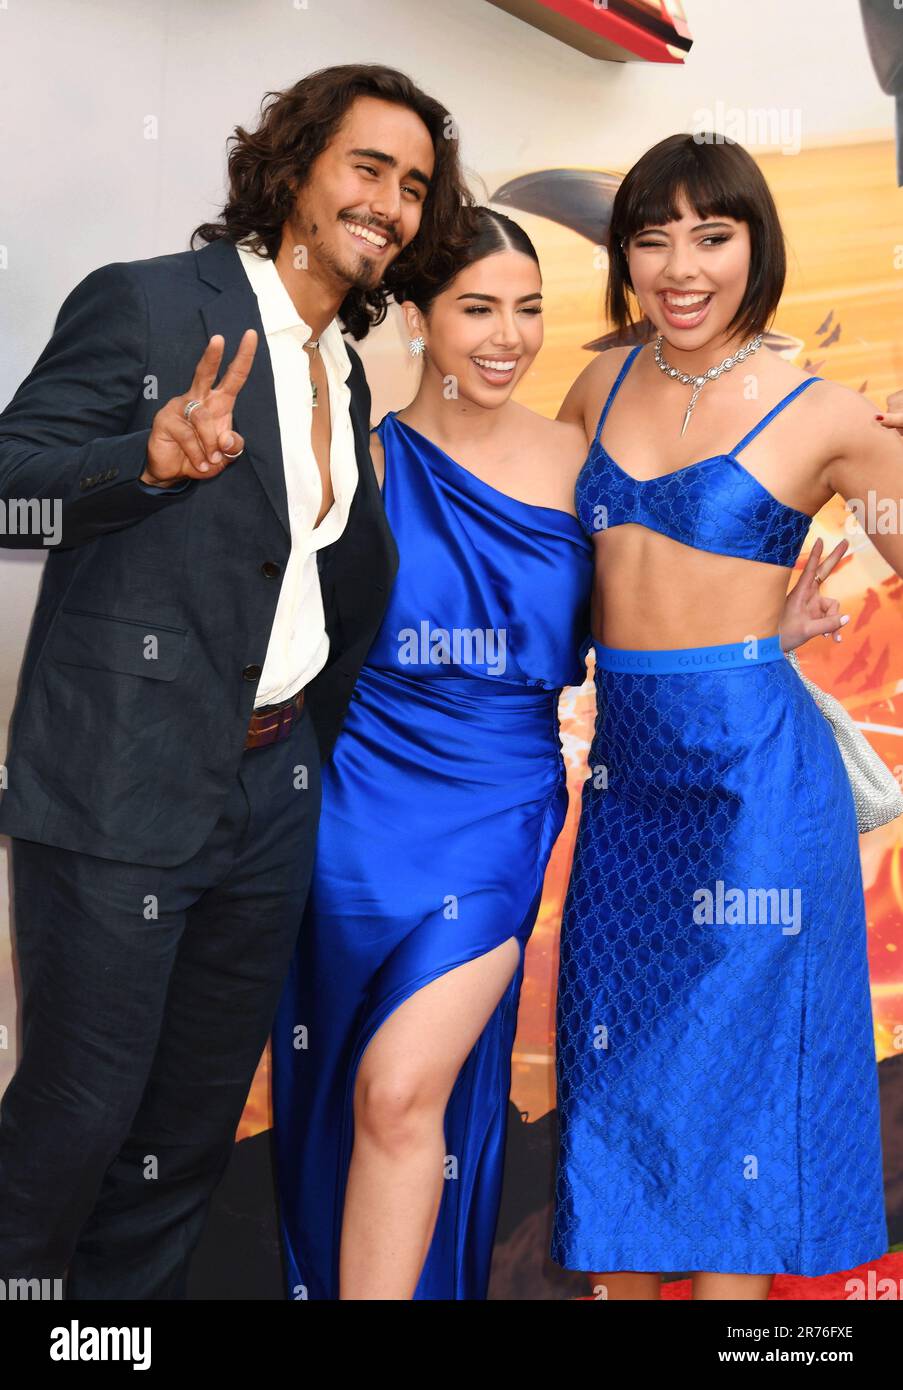 Hollywood, California, USA. 12th June, 2023. (L-R) Michael Cimino, Amanda Diaz and Xochitl Gomez attend the Los Angeles premiere of Warner Bros. 'The Flash' at Ovation Hollywood on June 12, 2023 in Hollywood, California. Credit: Jeffrey Mayer/Jtm Photos/Media Punch/Alamy Live News Stock Photo